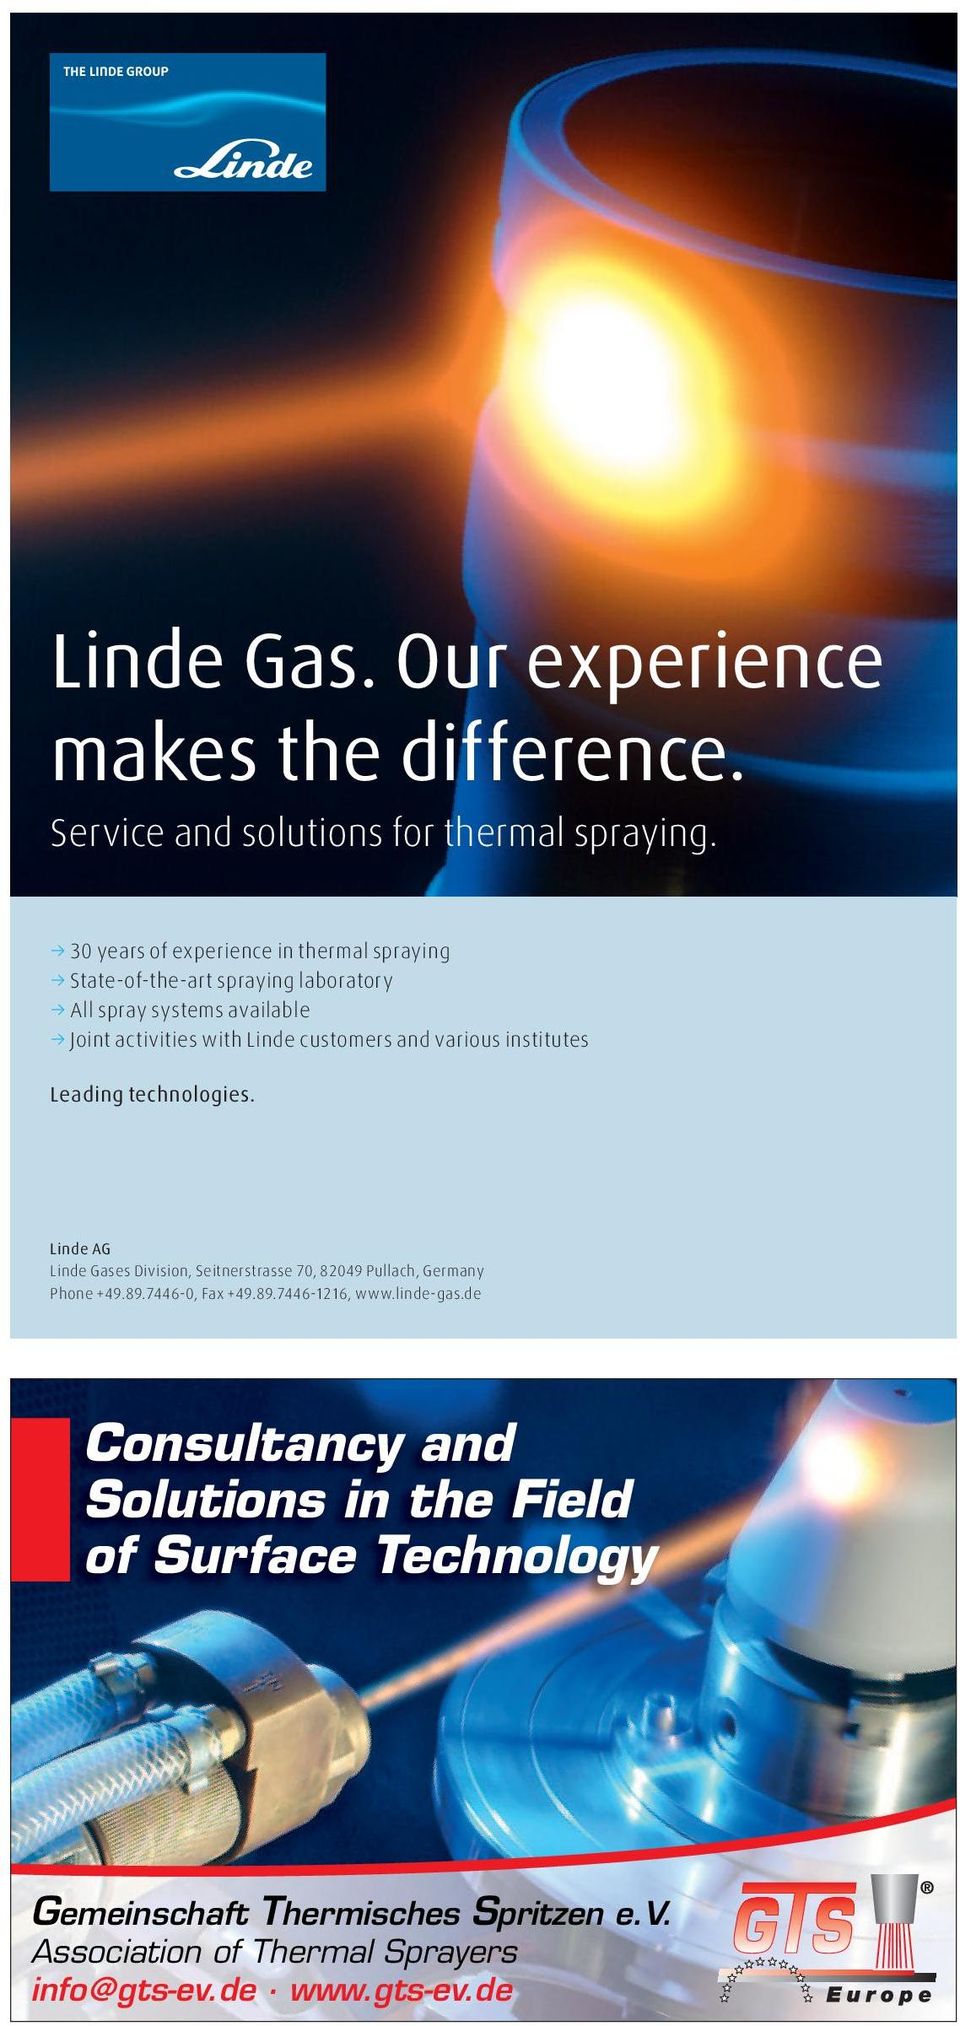 customers and various institutes Leading technologies. Linde AG Linde Gases Division, Seitnerstrasse 70, 82049 Pullach, Germany Phone +49.89.